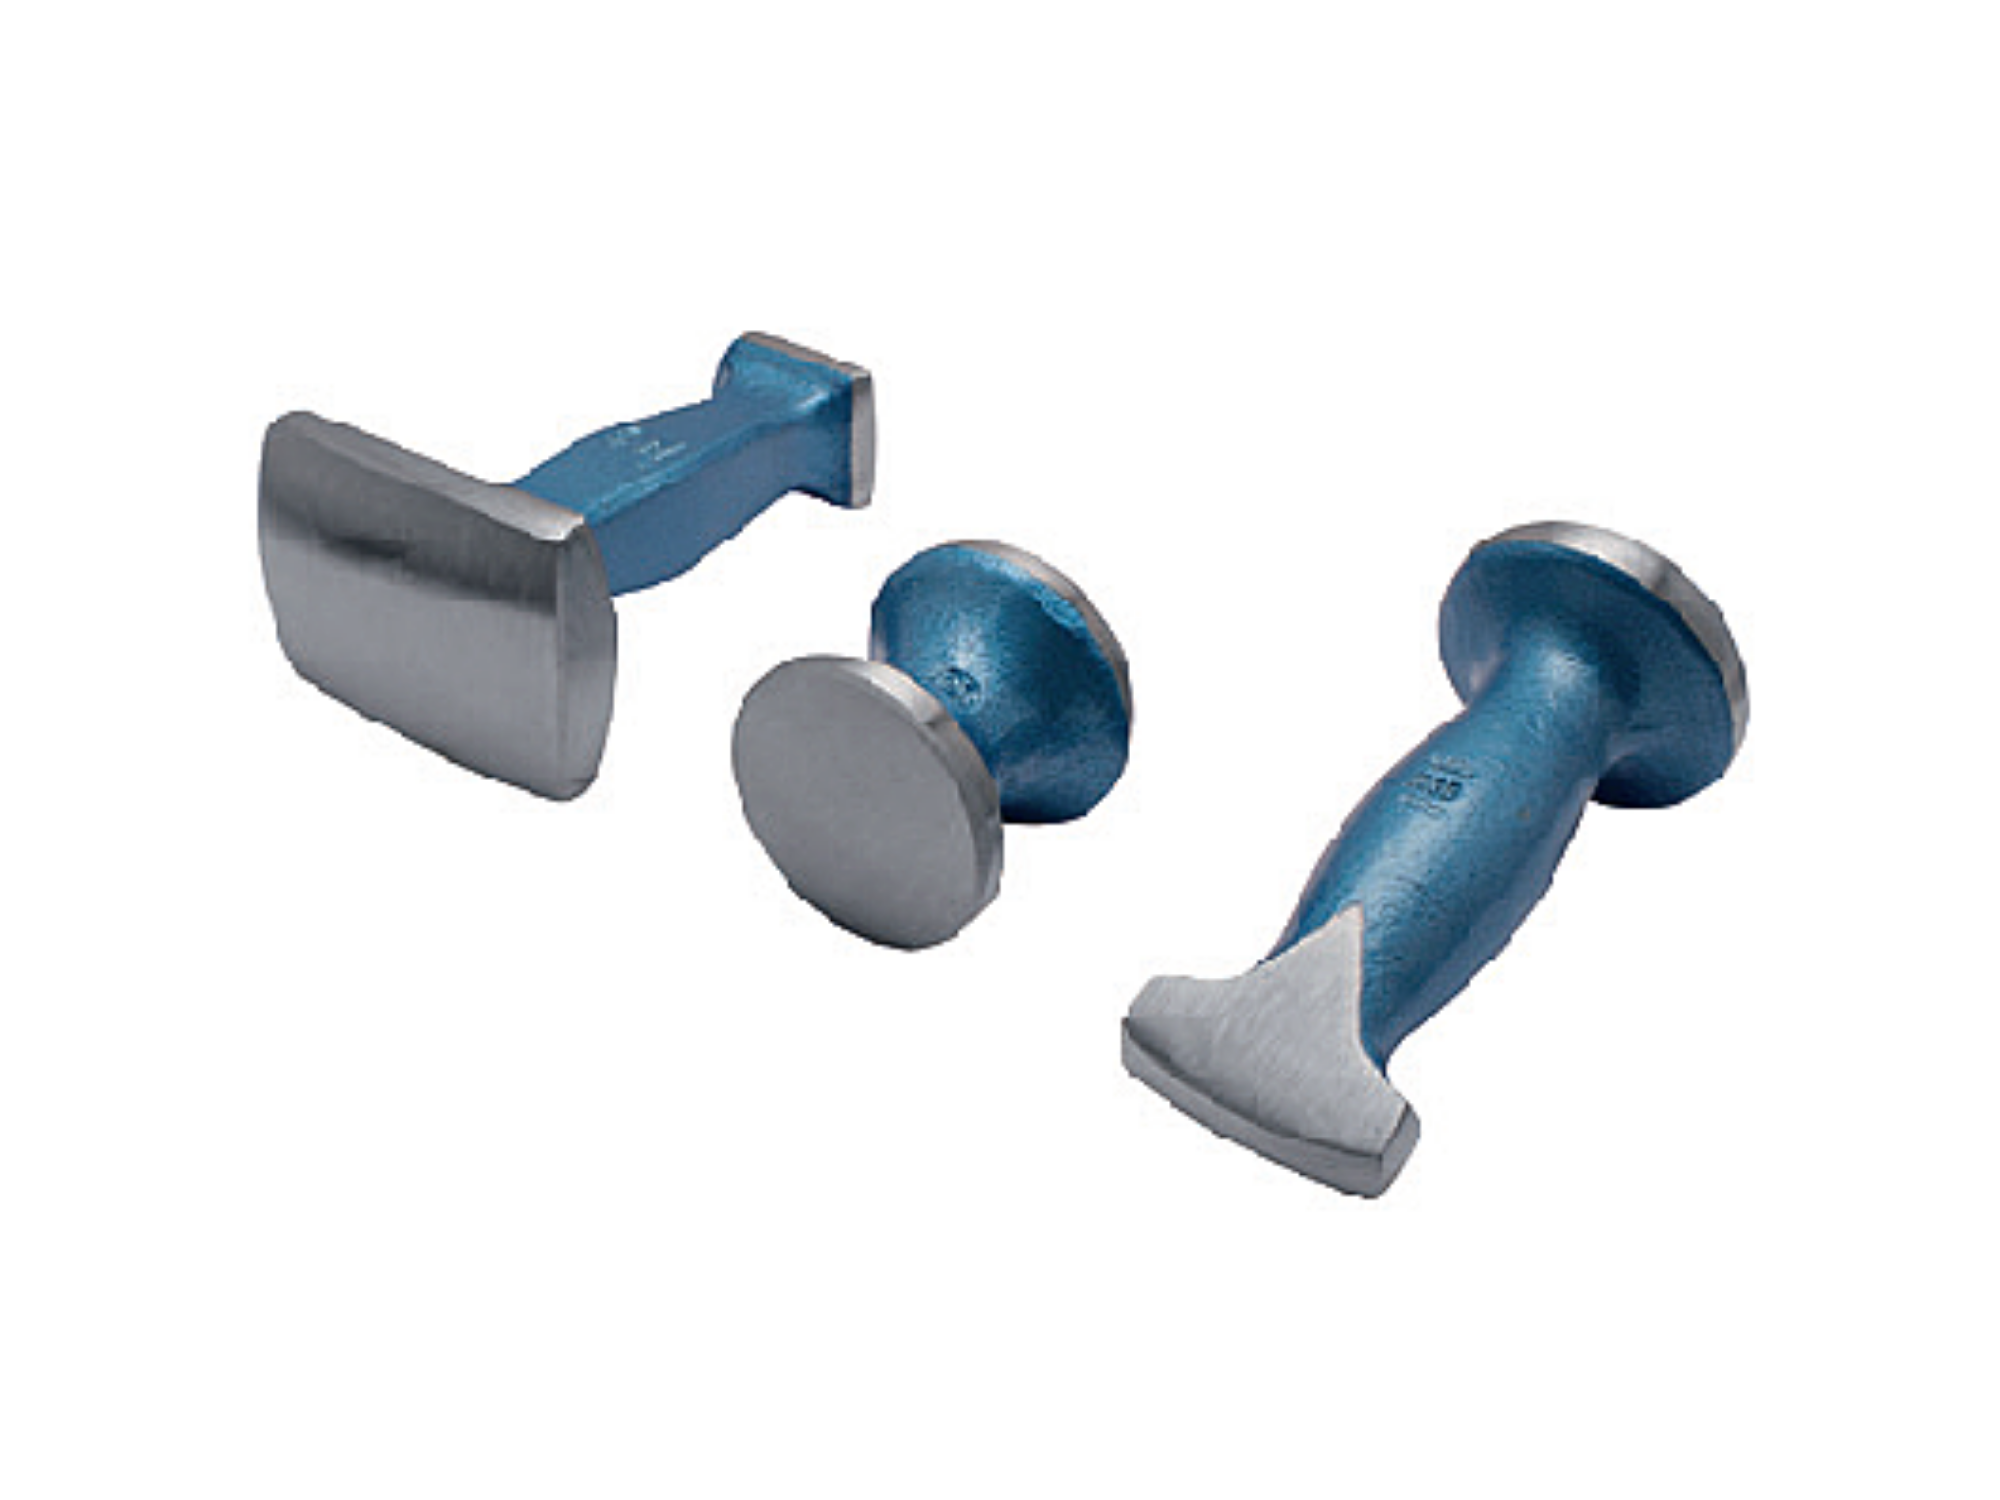 ELORA 1631 Bodywork General Purpose Dolly For Hand Anvil - Premium Bodywork Toe Dolly from ELORA - Shop now at Yew Aik.